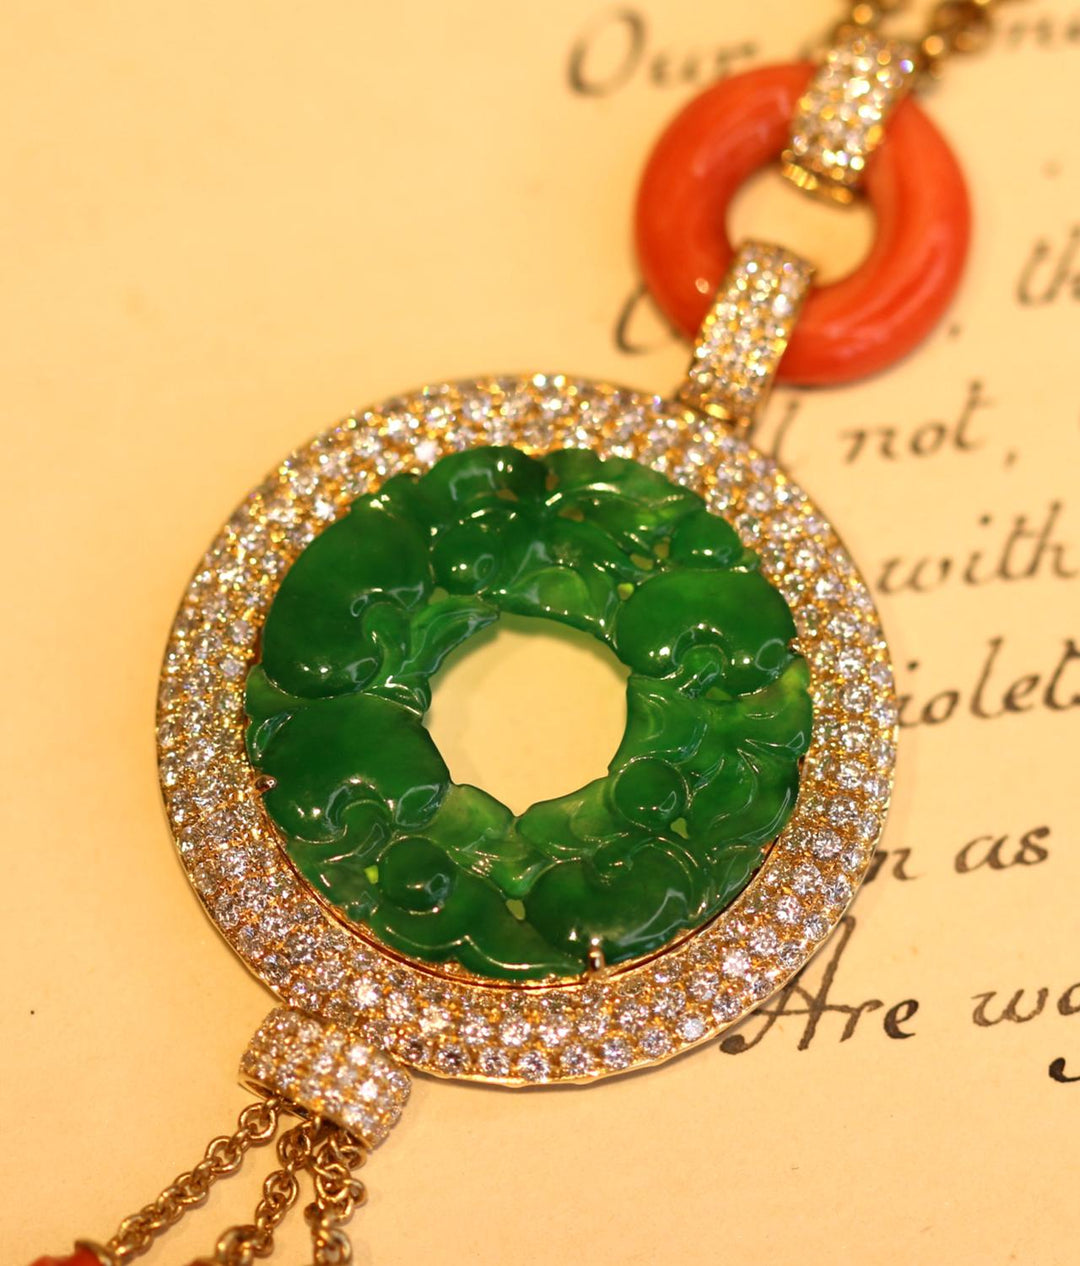 Natural No Treatment A Jadeite Coral Gold Diamond Pendant Necklace - SOLD